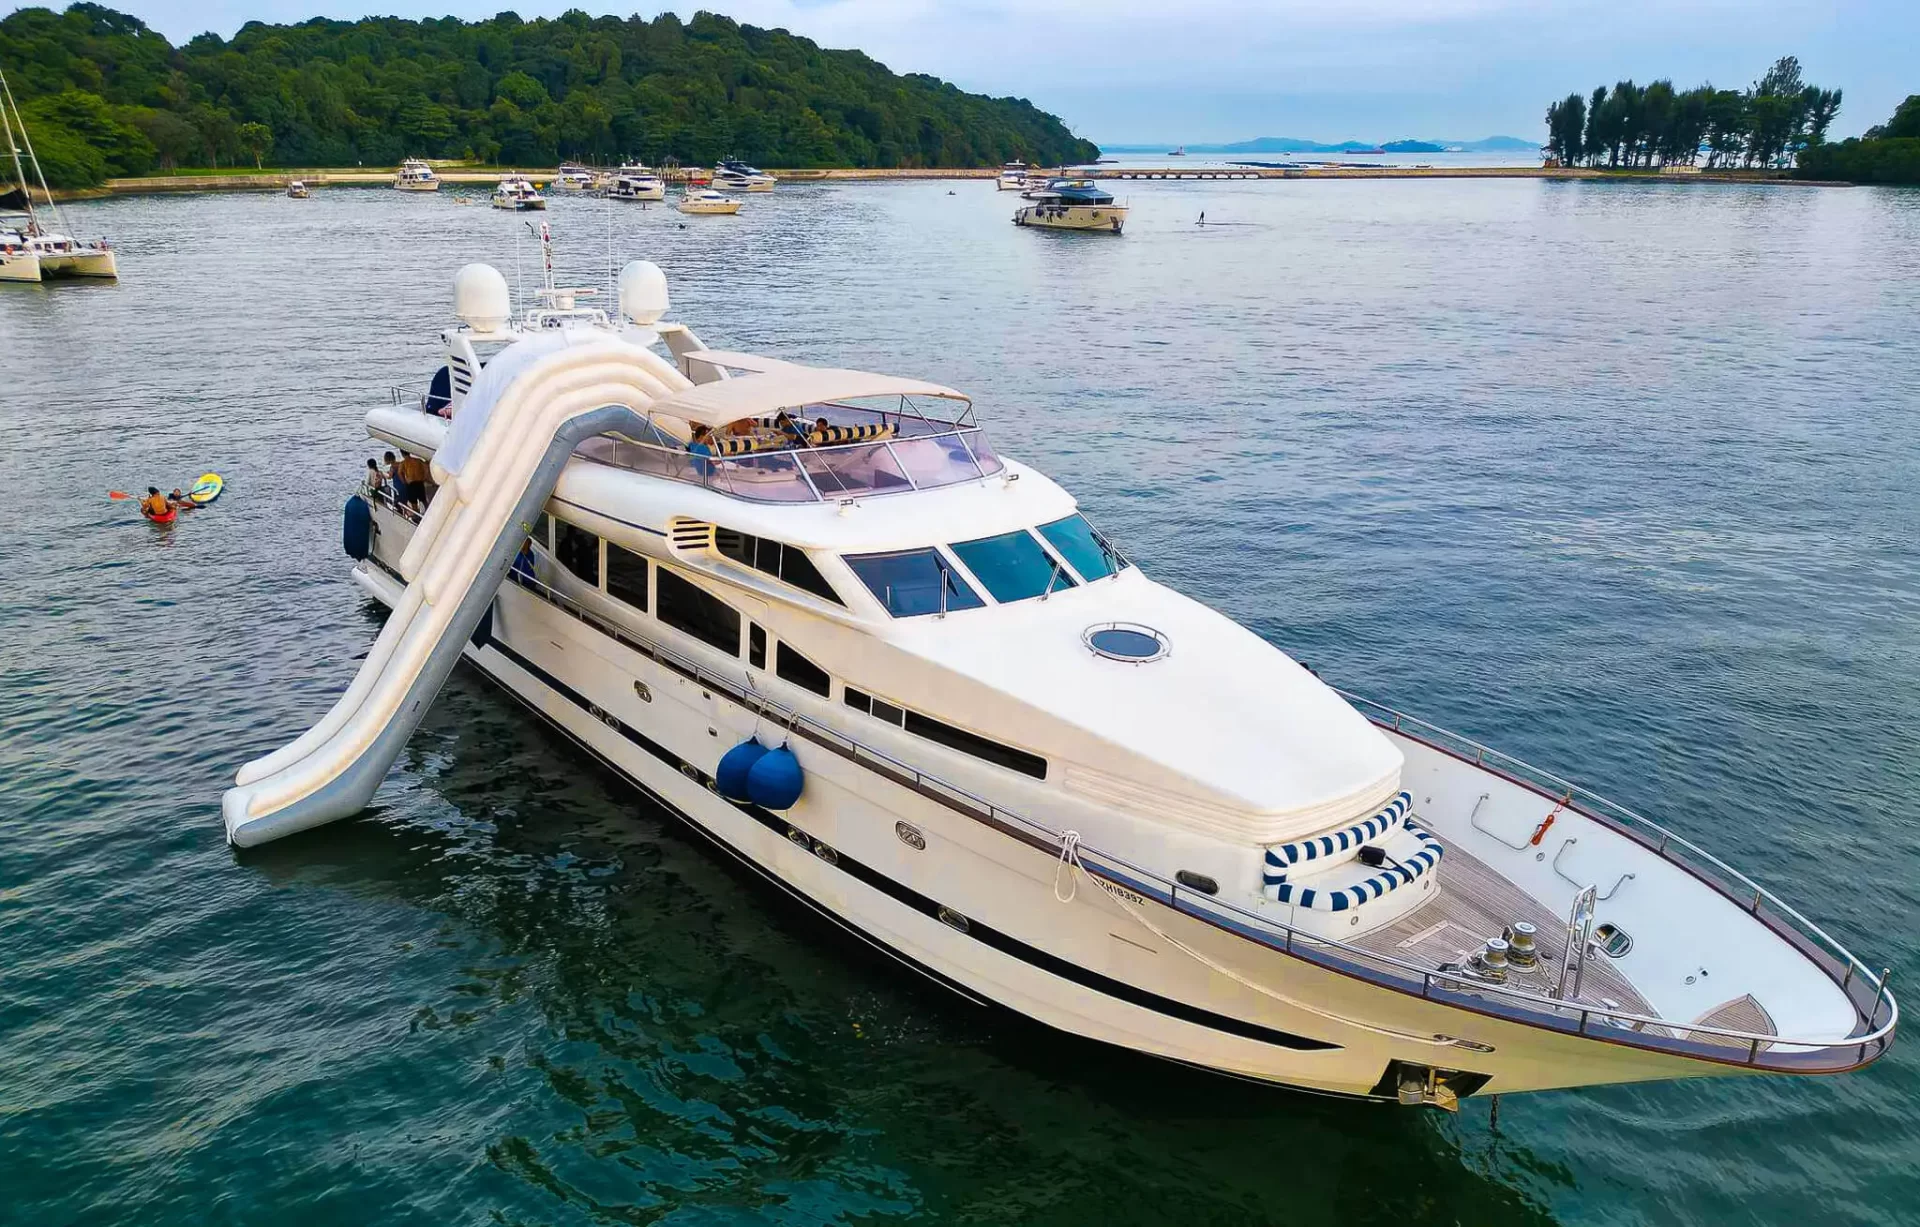 how much to rent a yacht in singapore